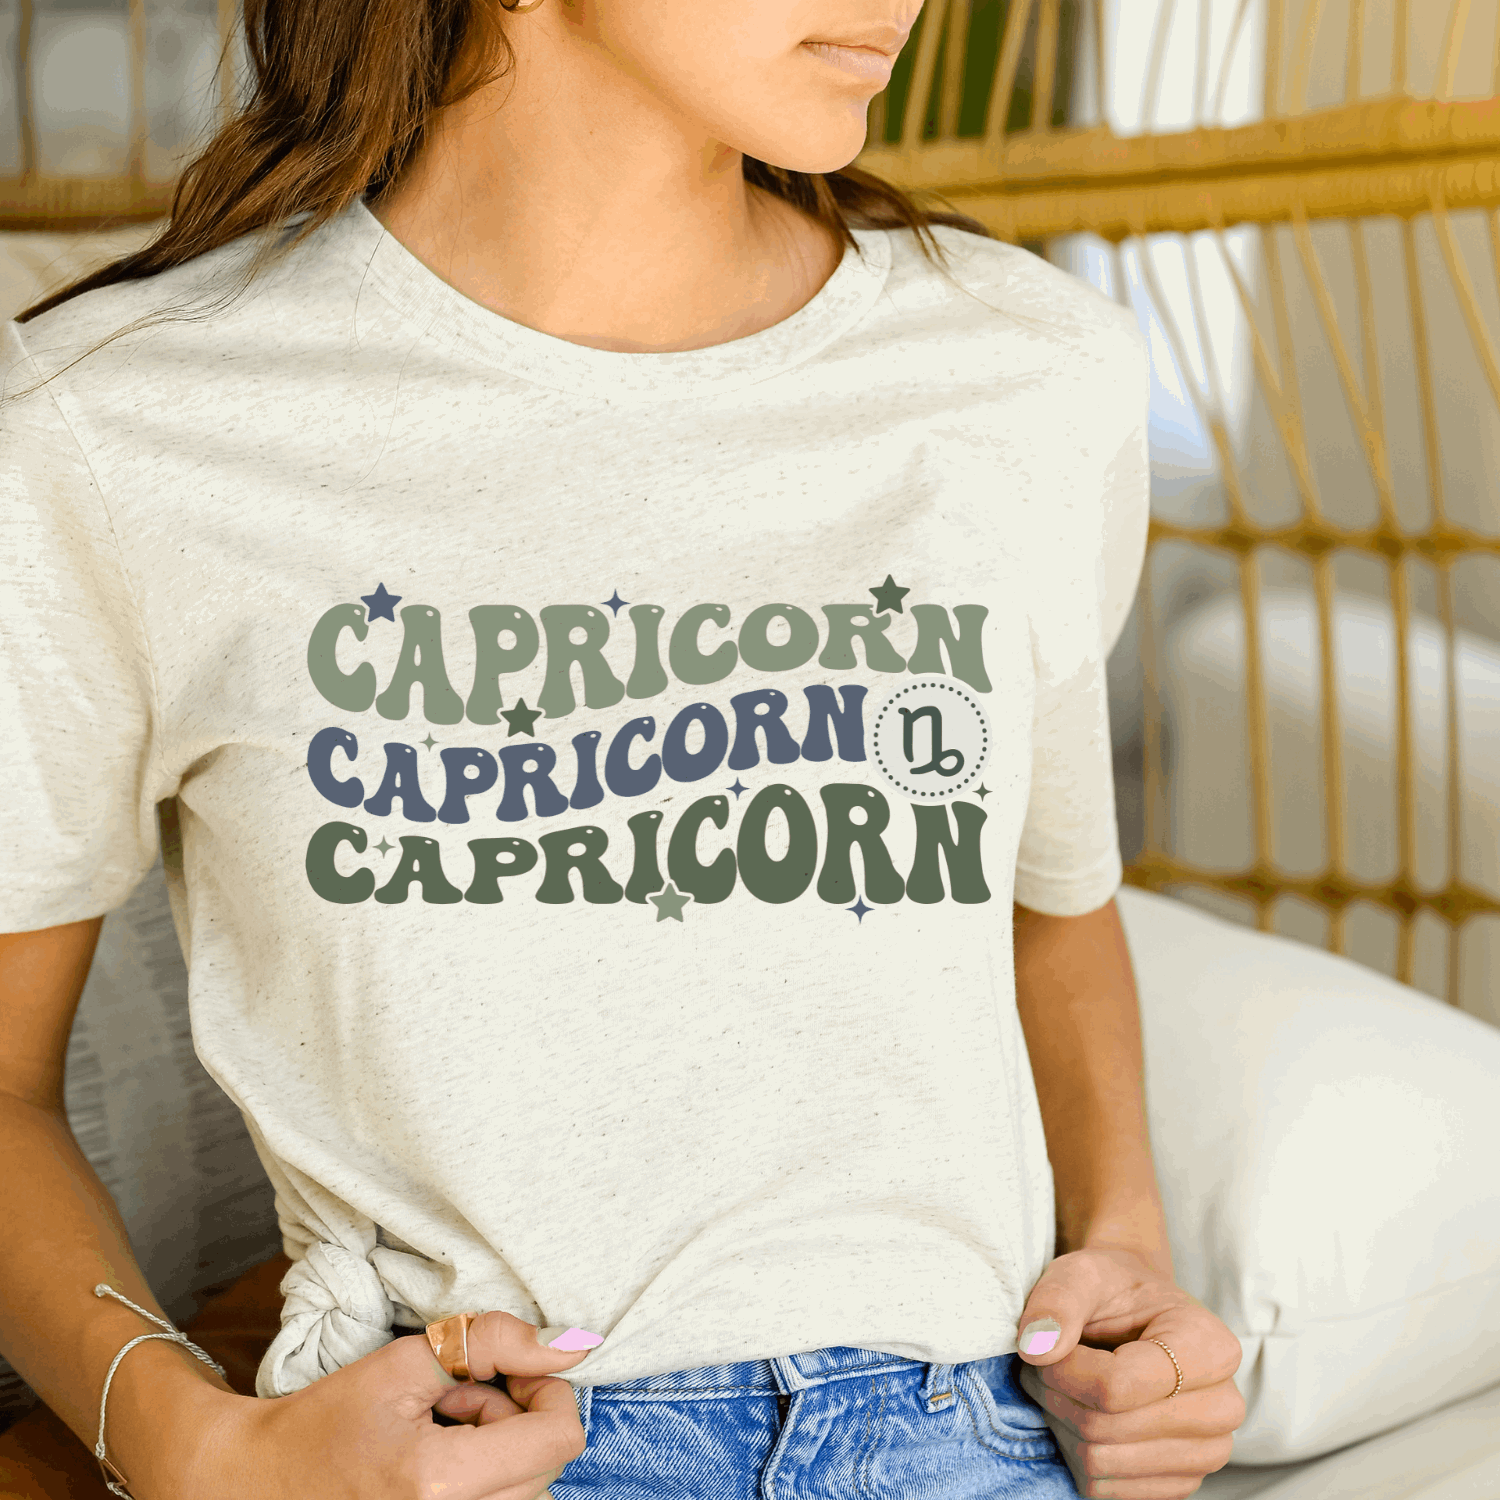 Dive into Capricorn style with our retro-inspired graphic tee. Soft tri-blend fabric, vintage vibe. Celebrate your sign in comfort. Shop now